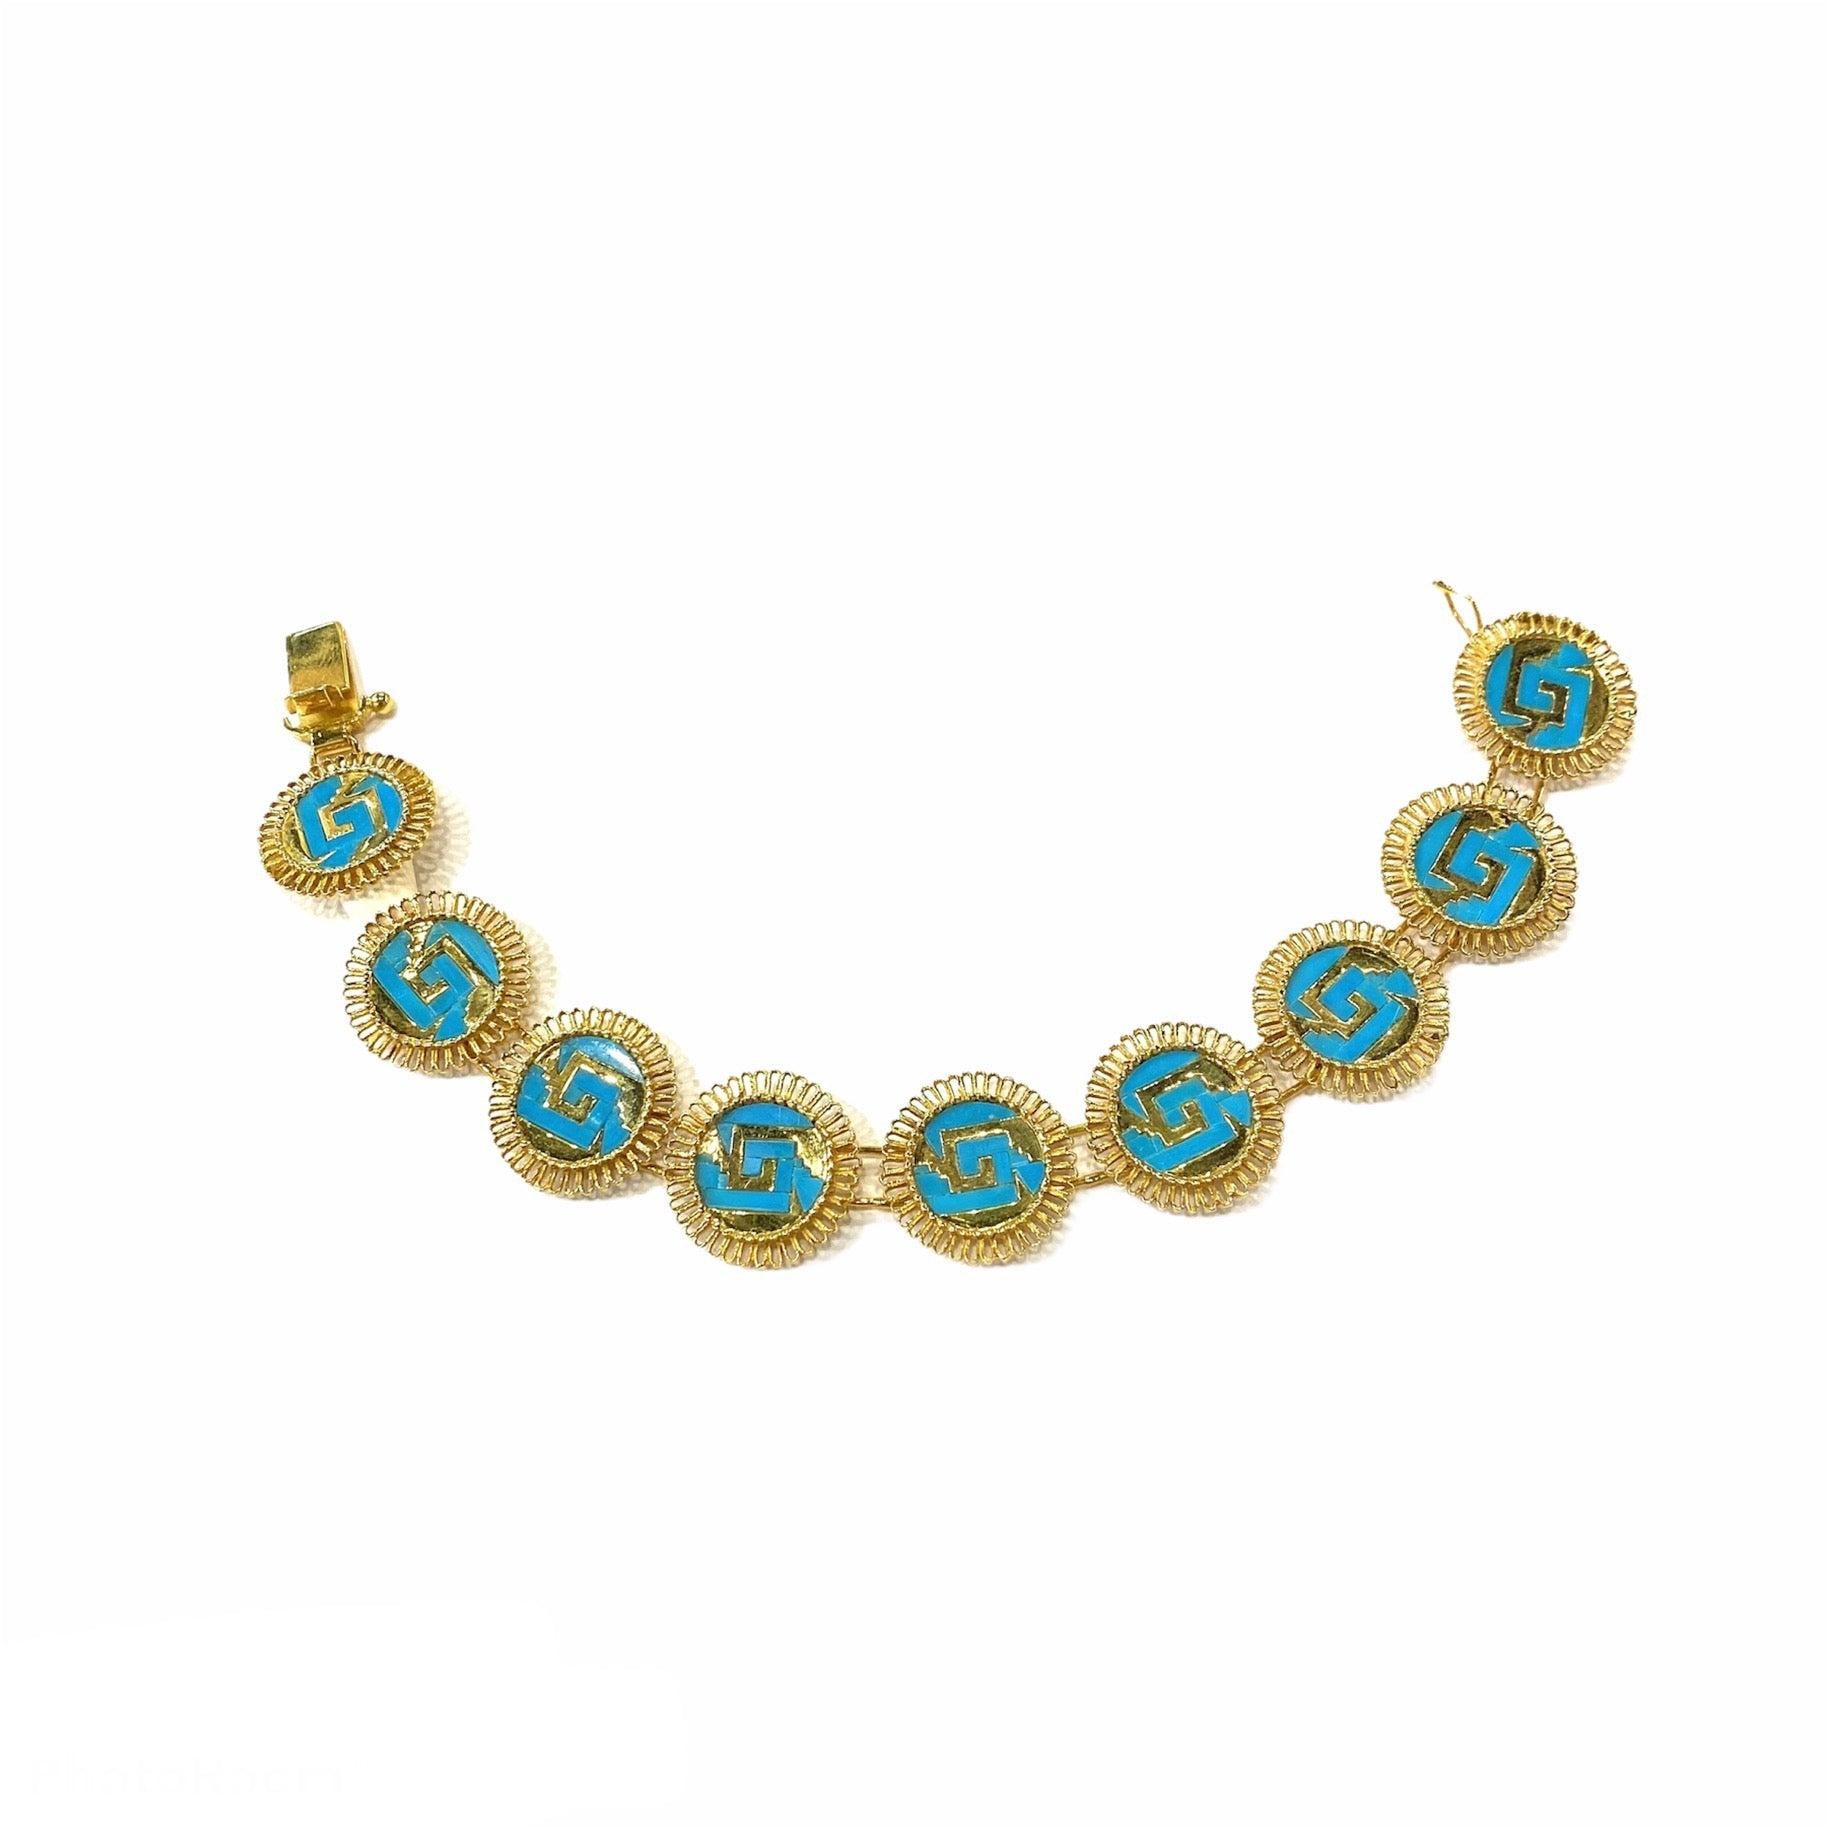 Artisan Oro de Monte Alban 14k Gold and Turquoise Bracelet. For Sale